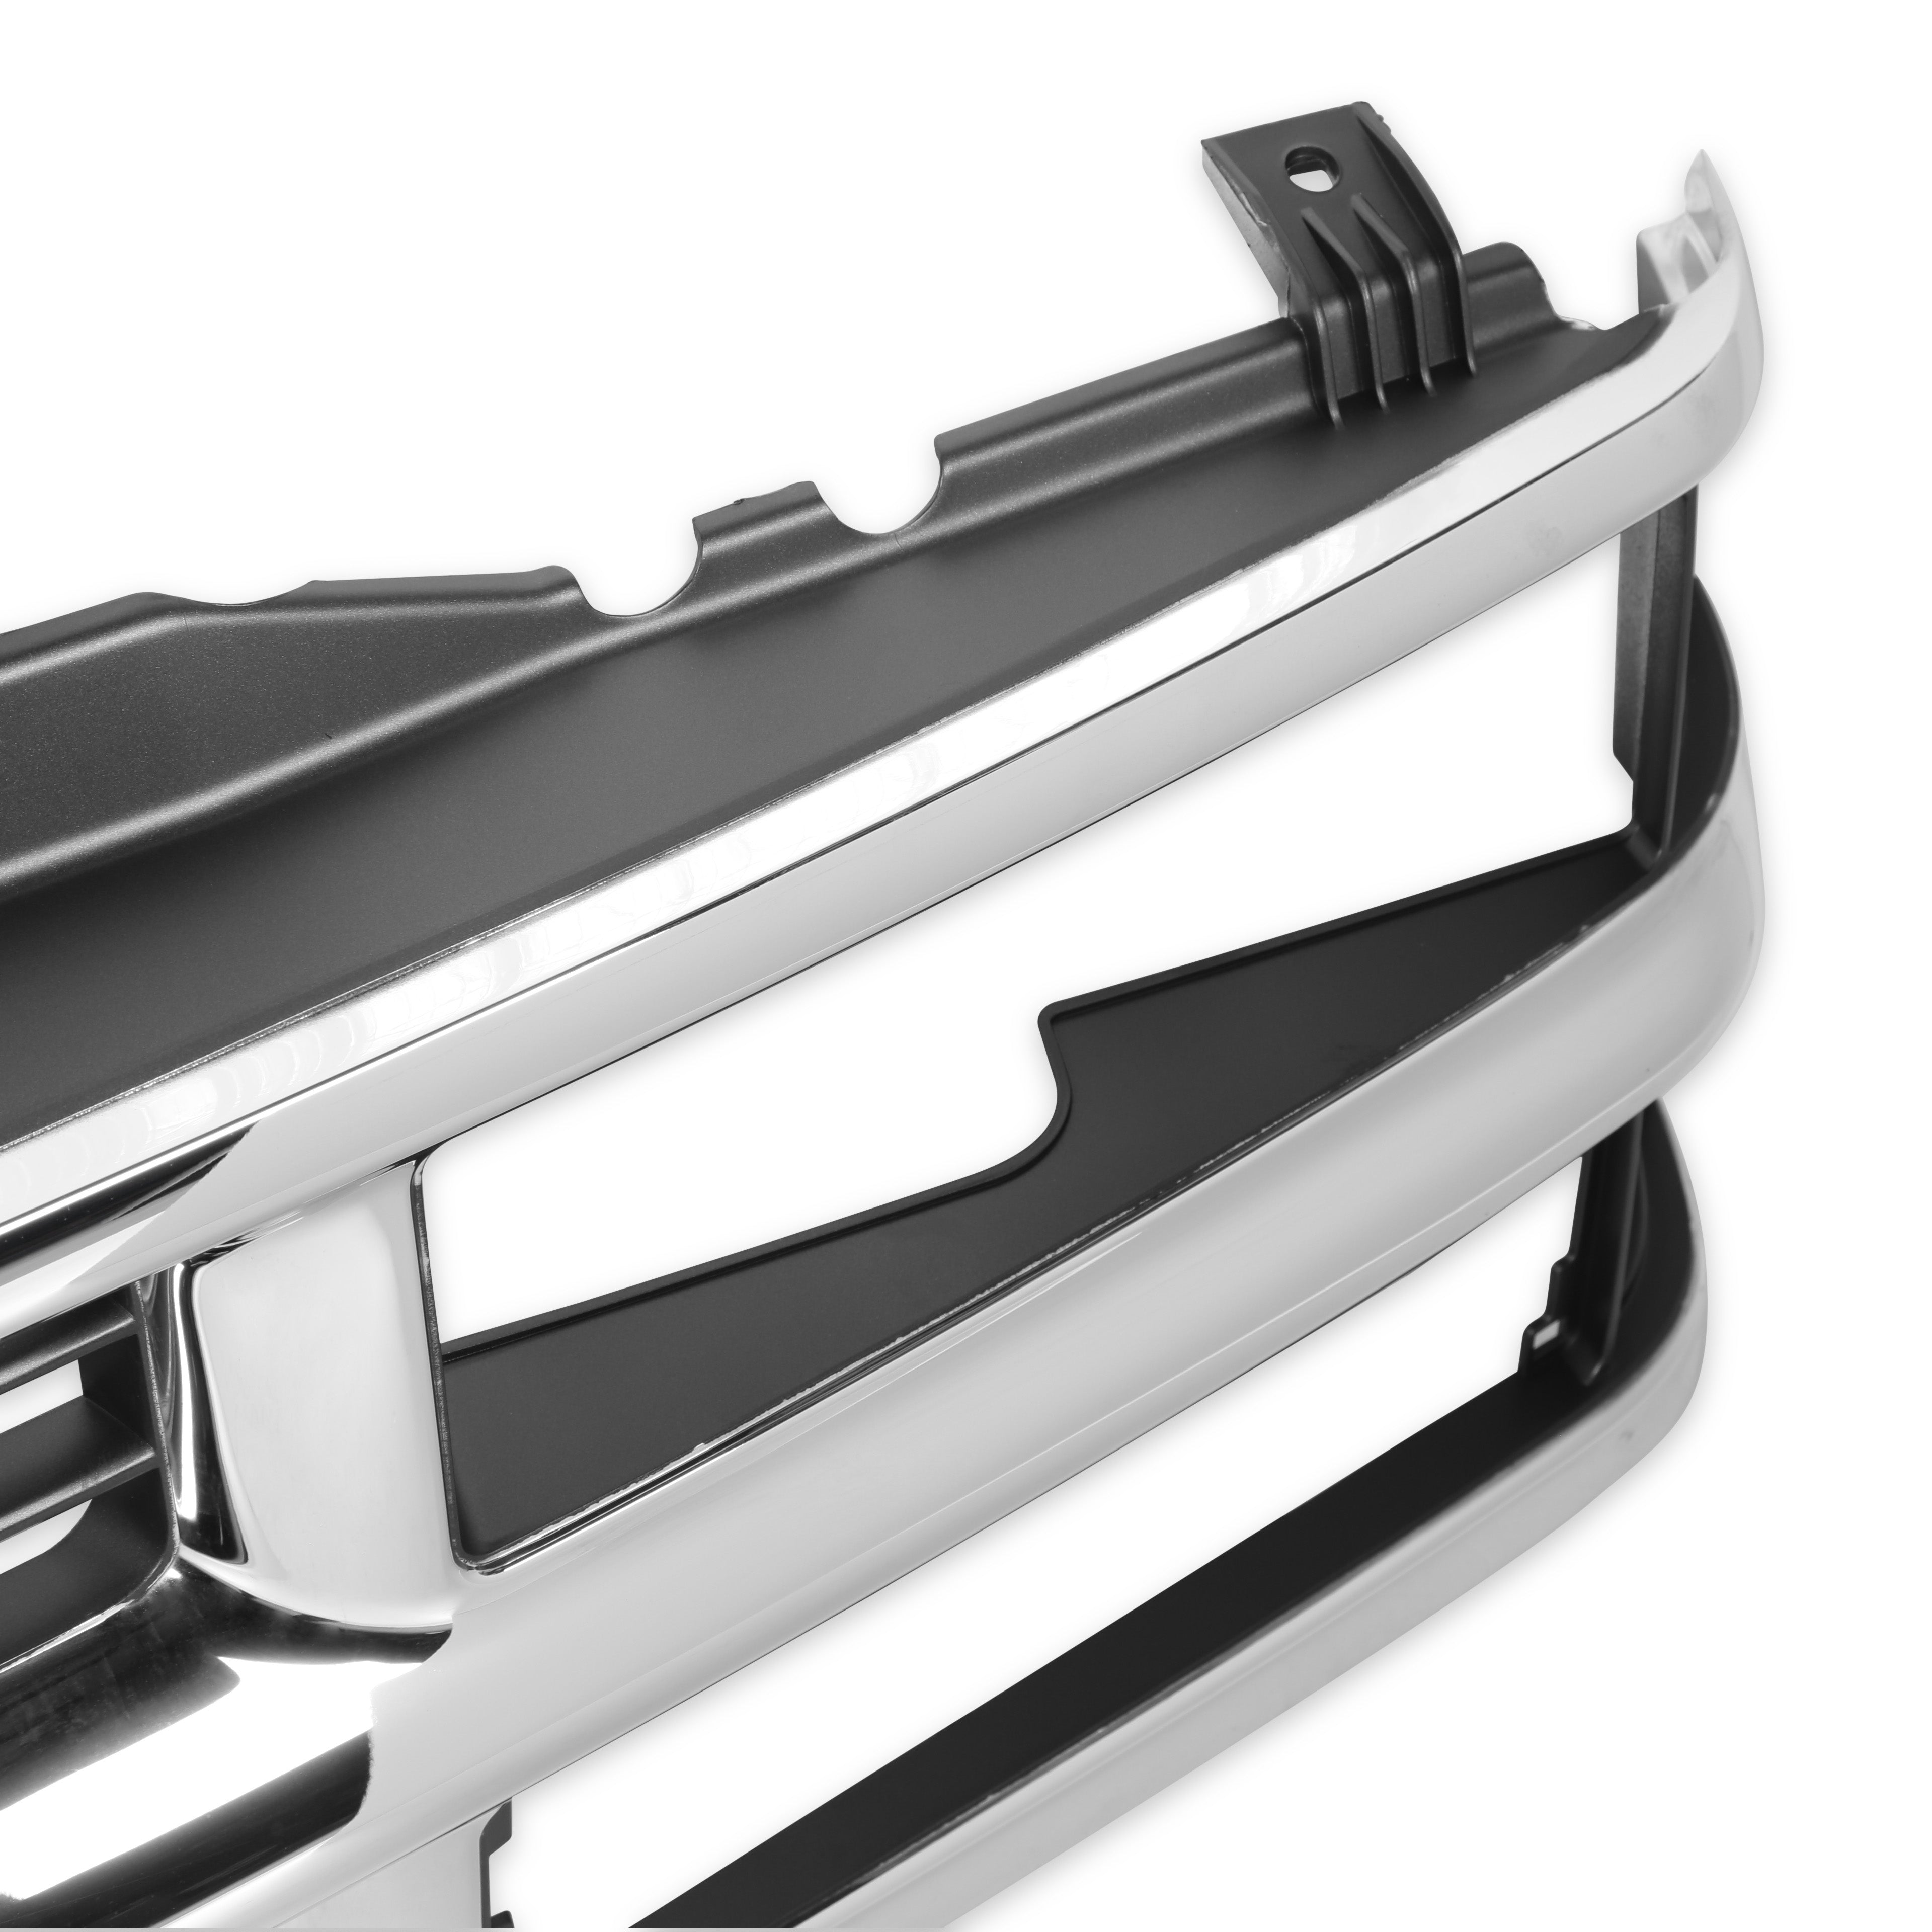 BROTHERS GMT400 Chevy Grille w/o Sport Package - Chrome/Black pn 04-488